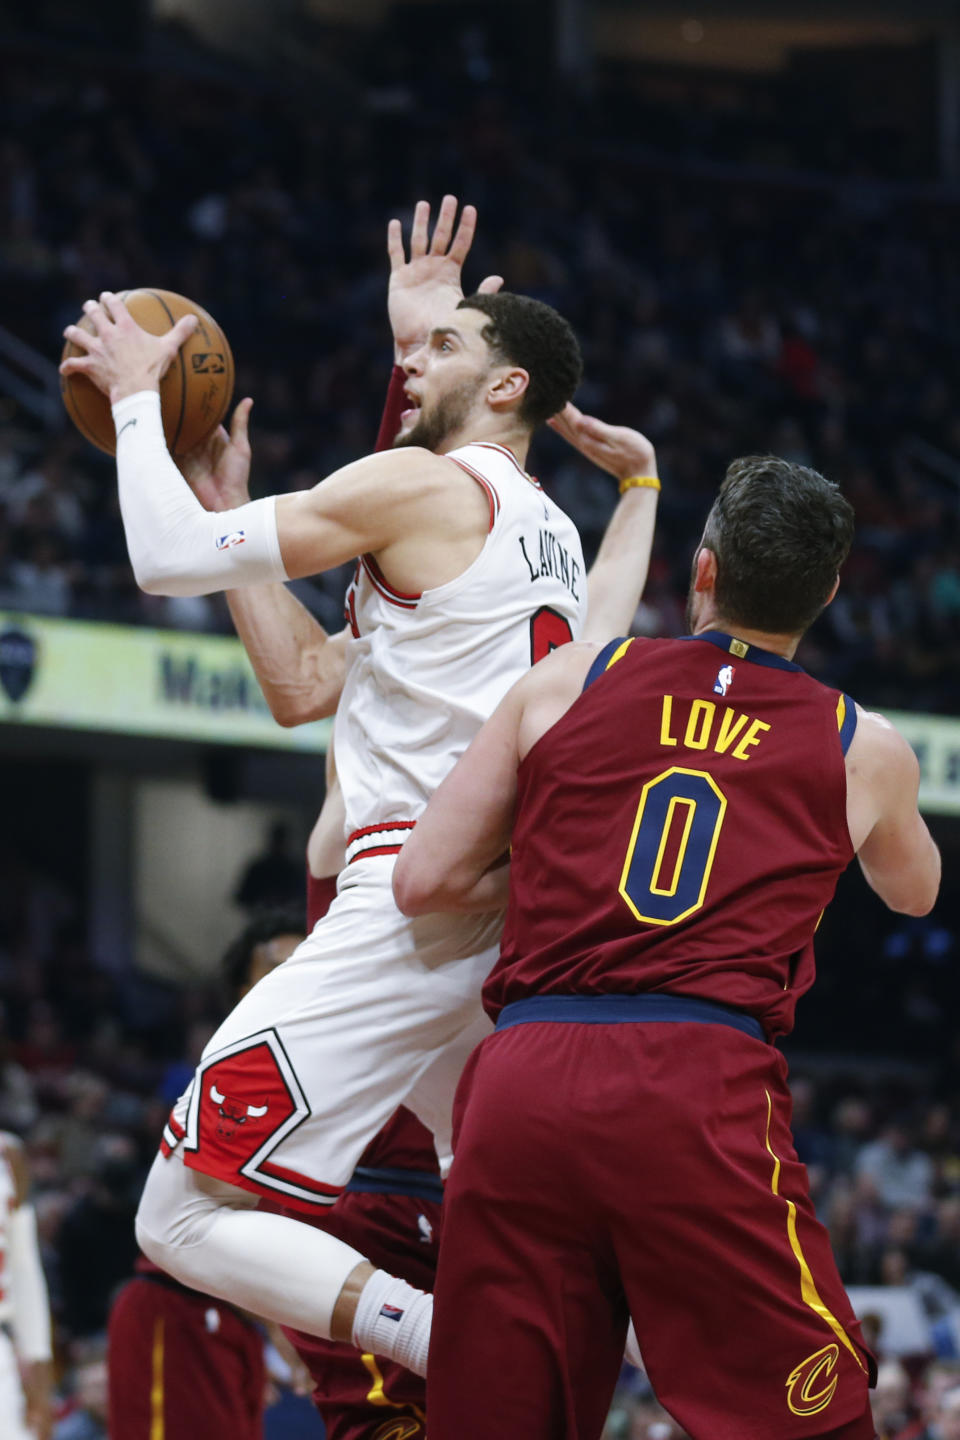 Chicago Bulls' Zach LaVine, left, goes up to shoot past Cleveland Cavaliers' Kevin Love (0) in the second half of an NBA basketball game, Saturday, Jan. 25, 2020, in Cleveland. (AP Photo/Ron Schwane)